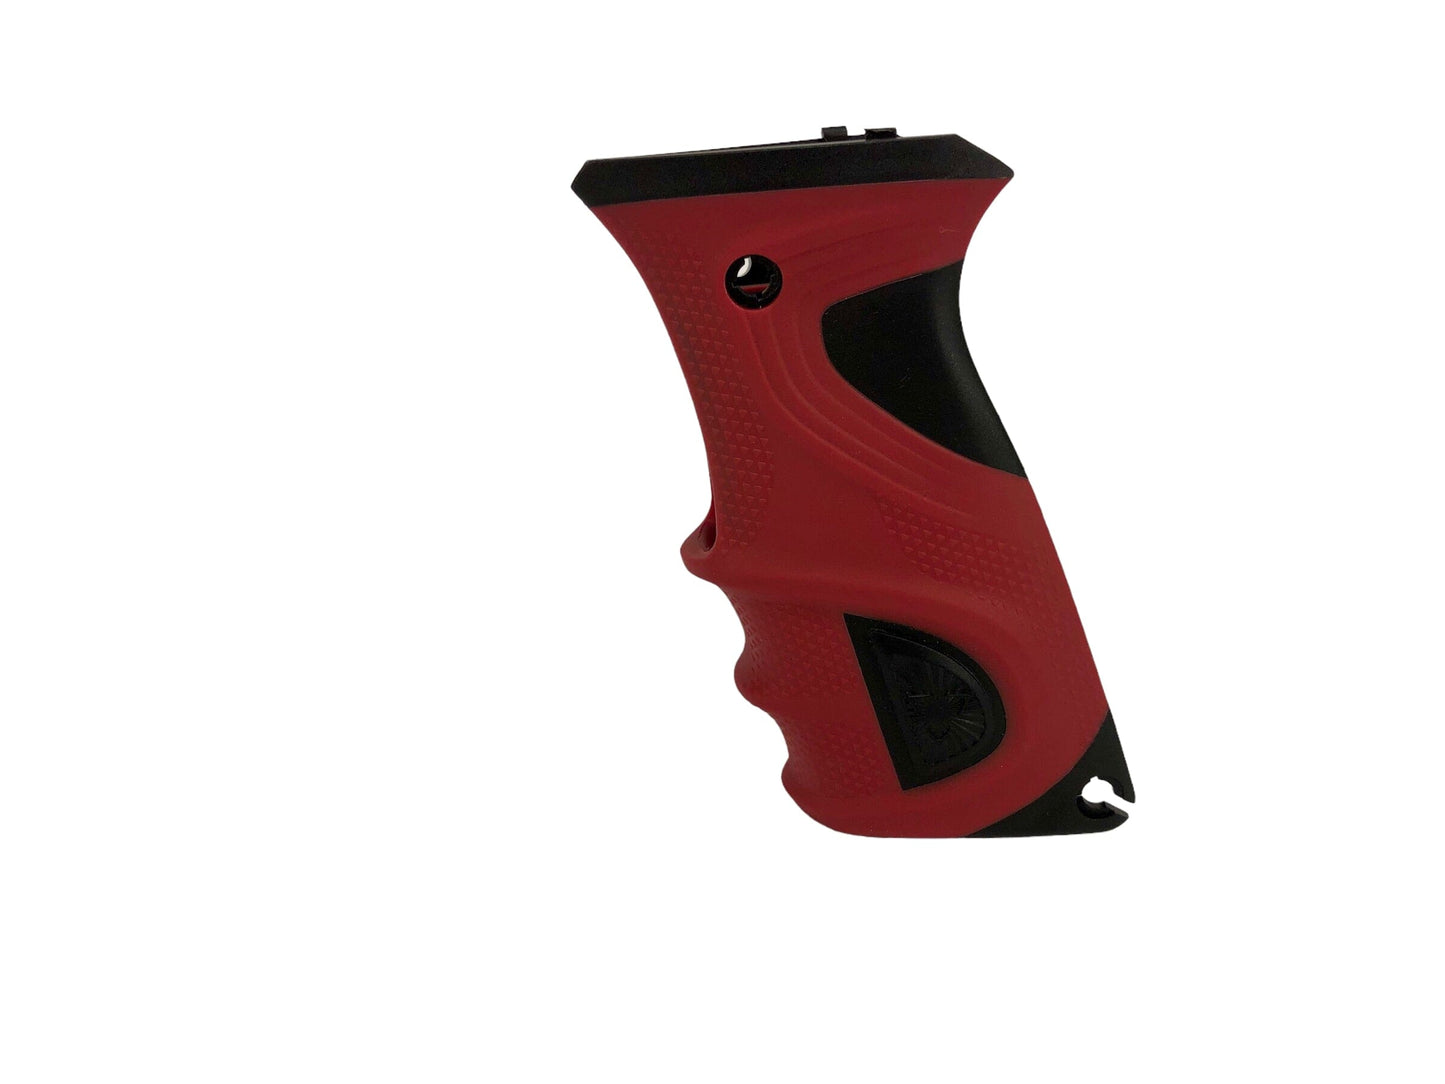 Used DLX Luxe TM40 Rubber Grips - Red Paintball Gun from CPXBrosPaintball Buy/Sell/Trade Paintball Markers, Paintball Hoppers, Paintball Masks, and Hormesis Headbands